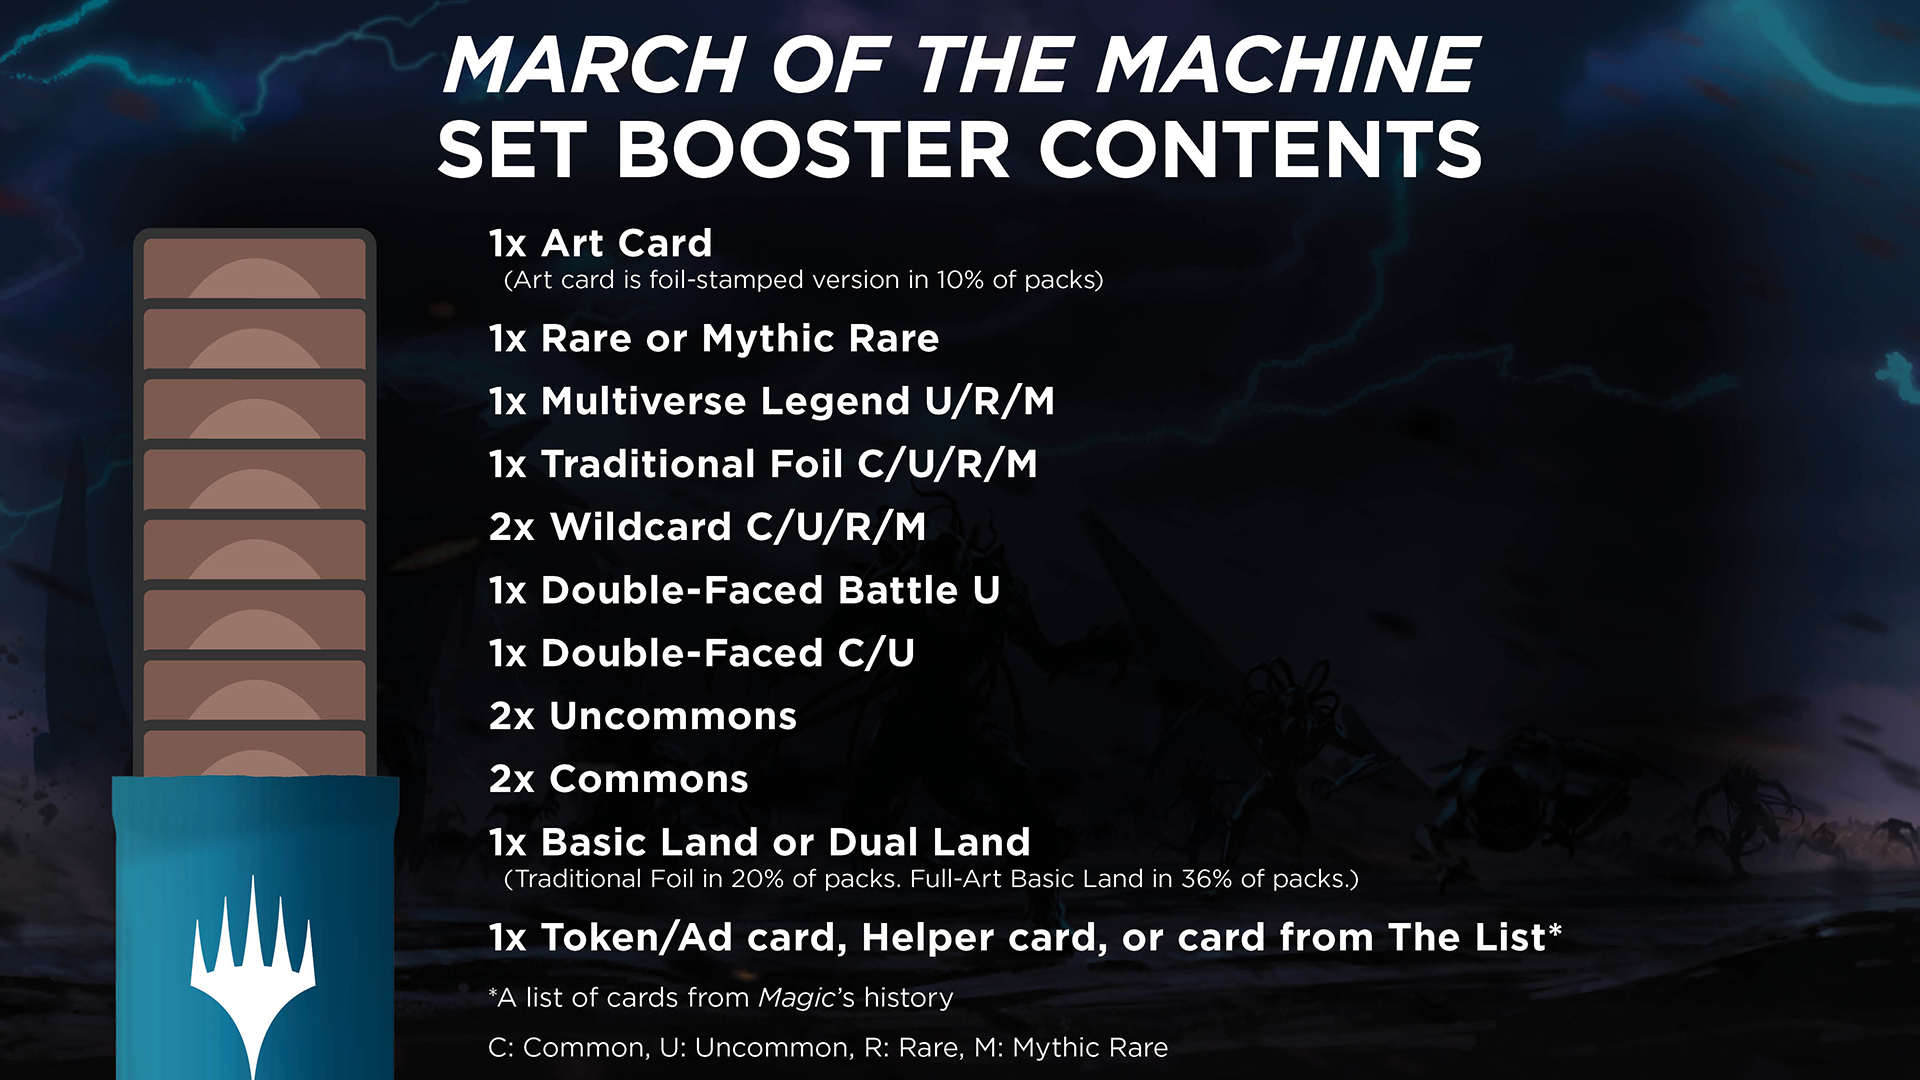 March of the Machine Set Booster Contents